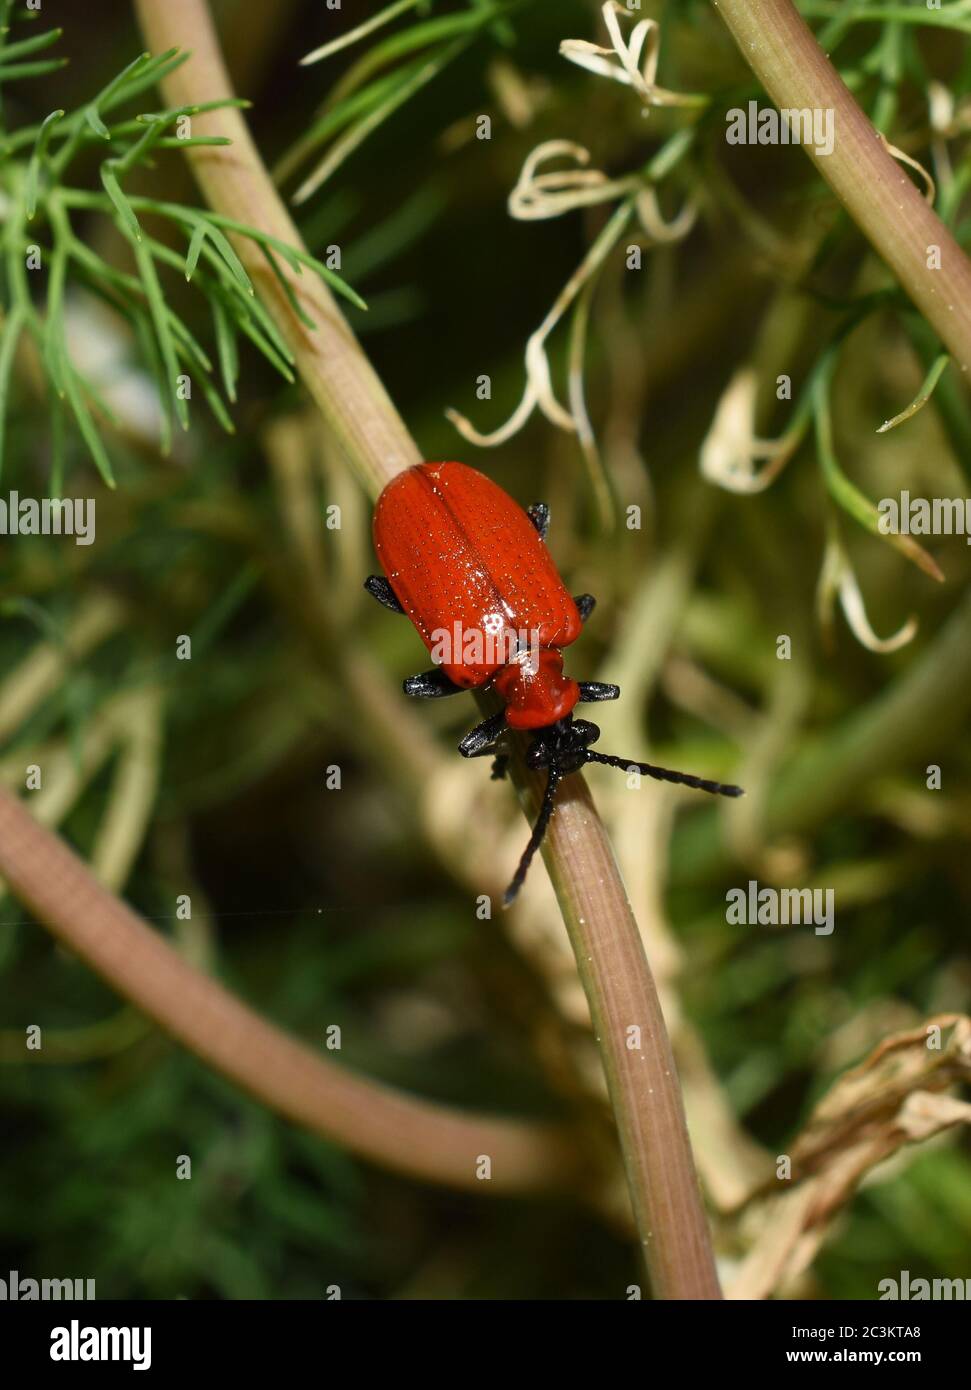 Red lily beetle garden pest insect Lilioceris lilii on a leaf Stock Photo